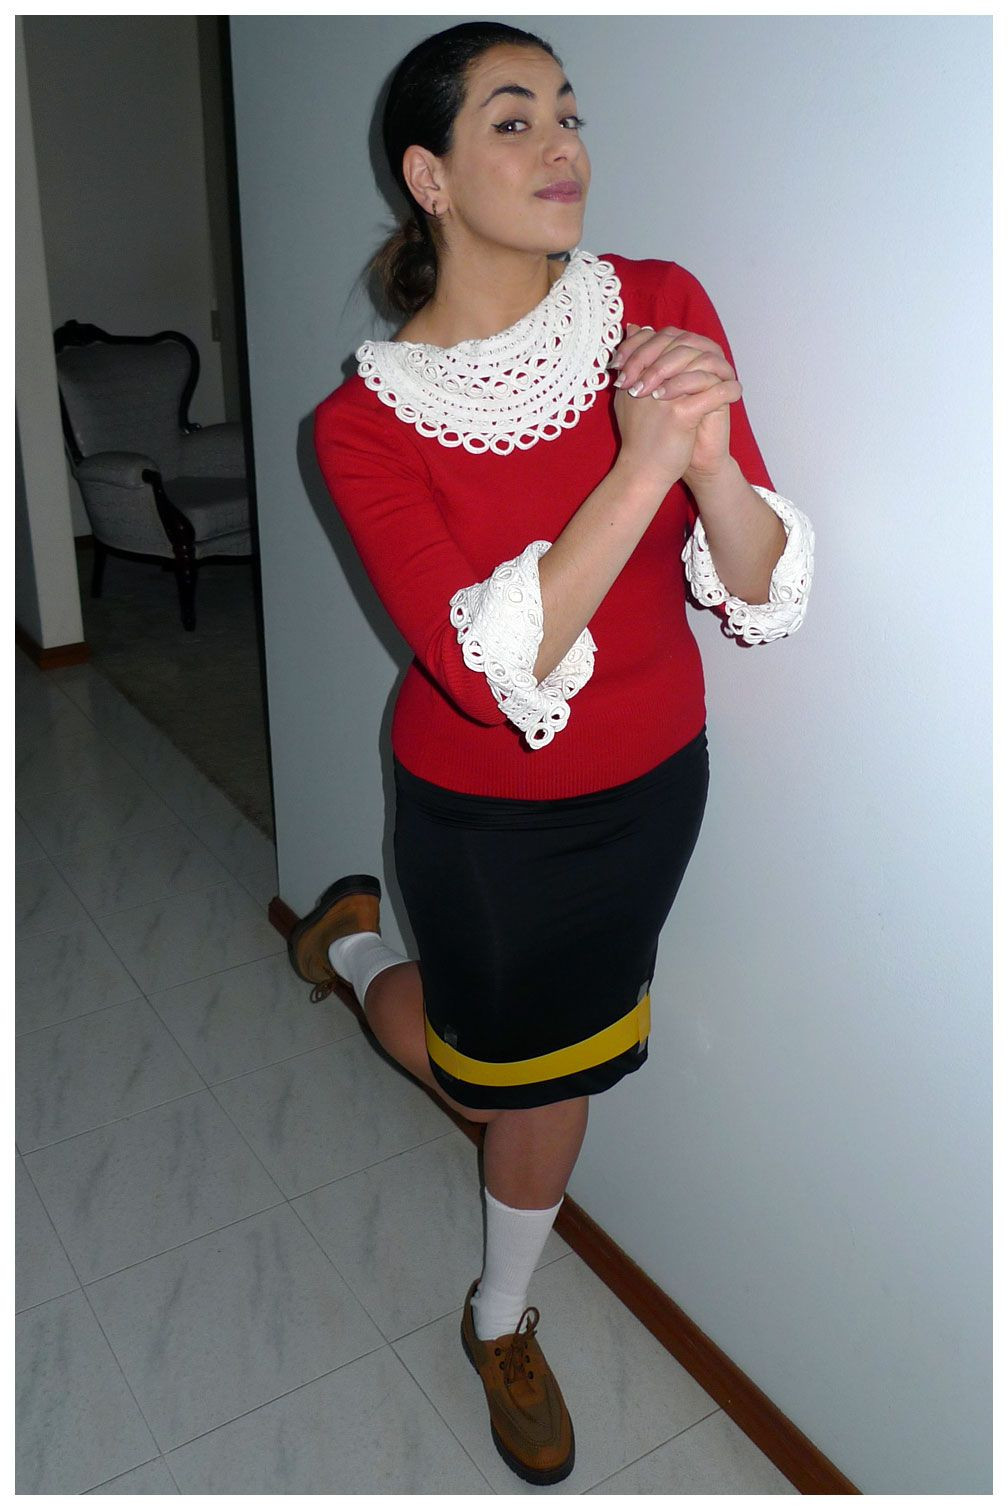 DIY Popeye And Olive Oyl Costume
 Olive Oil from Popeye Costume